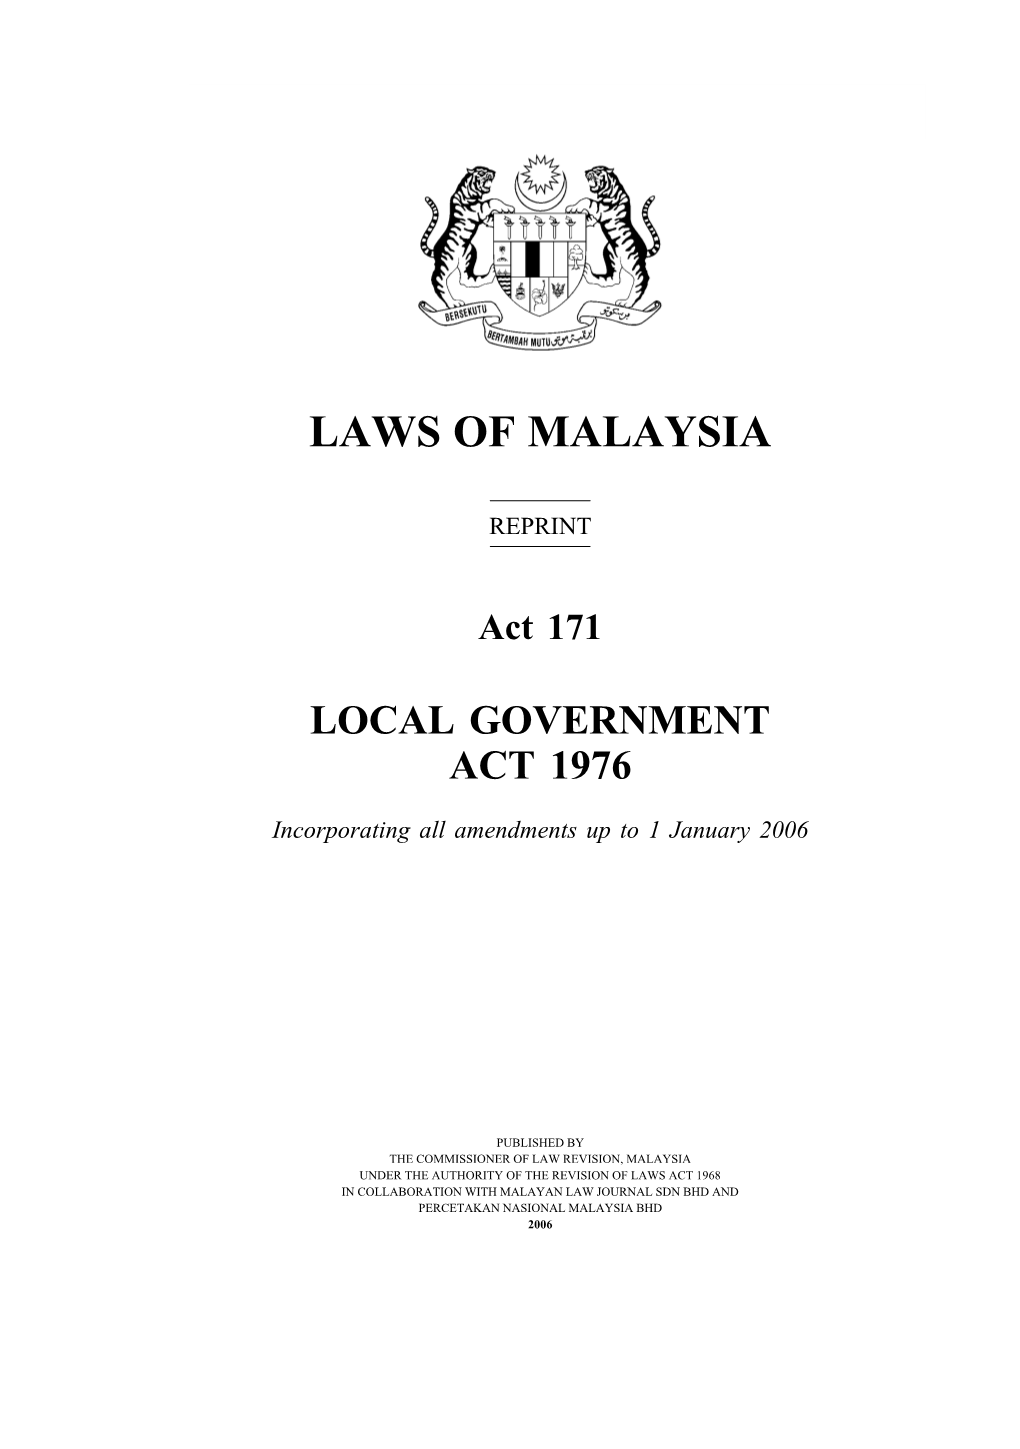 Act 171 LOCAL GOVERNMENT ACT 1976